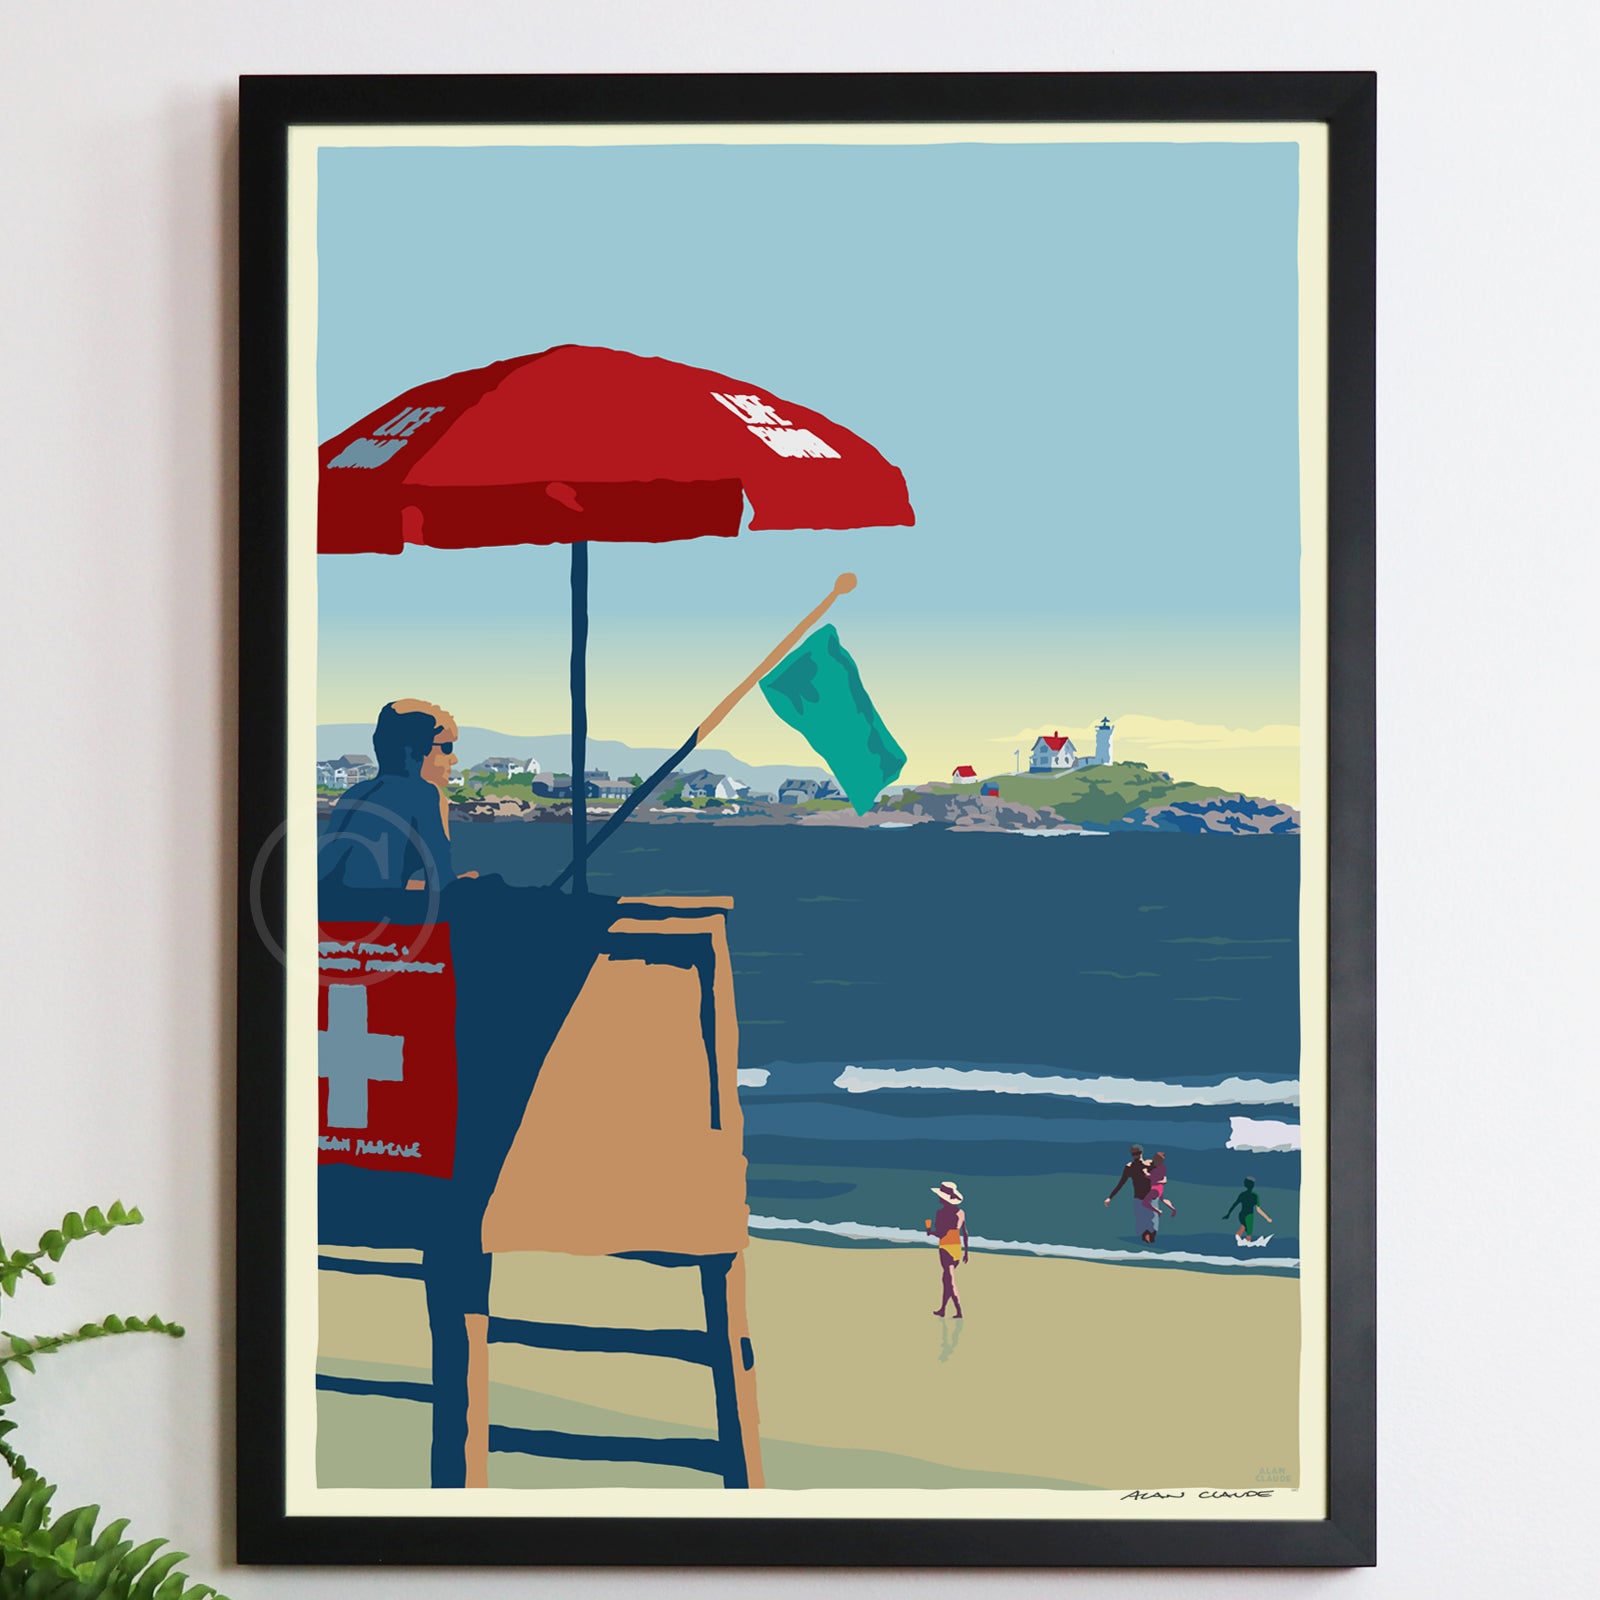 Lifeguard At The Nubble Light Art Print 18" x 24" Framed Wall Poster By Alan Claude - Maine